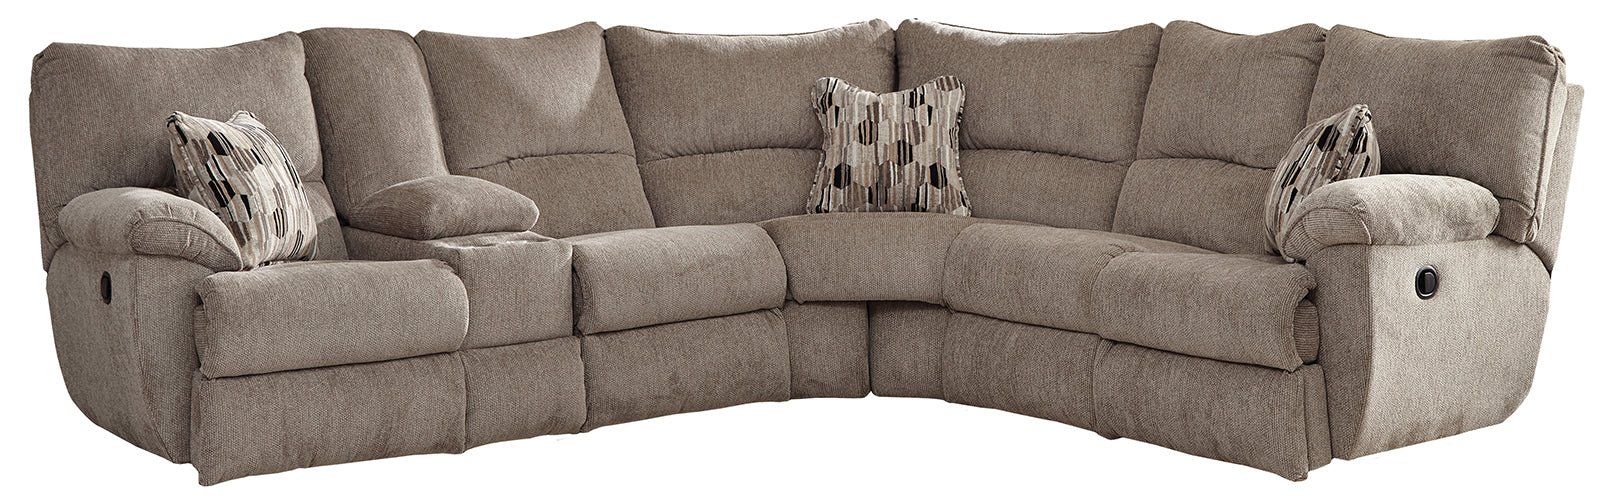 Catnapper Elliott 2pc Lay Flat Reclining Sectional in Pewter image